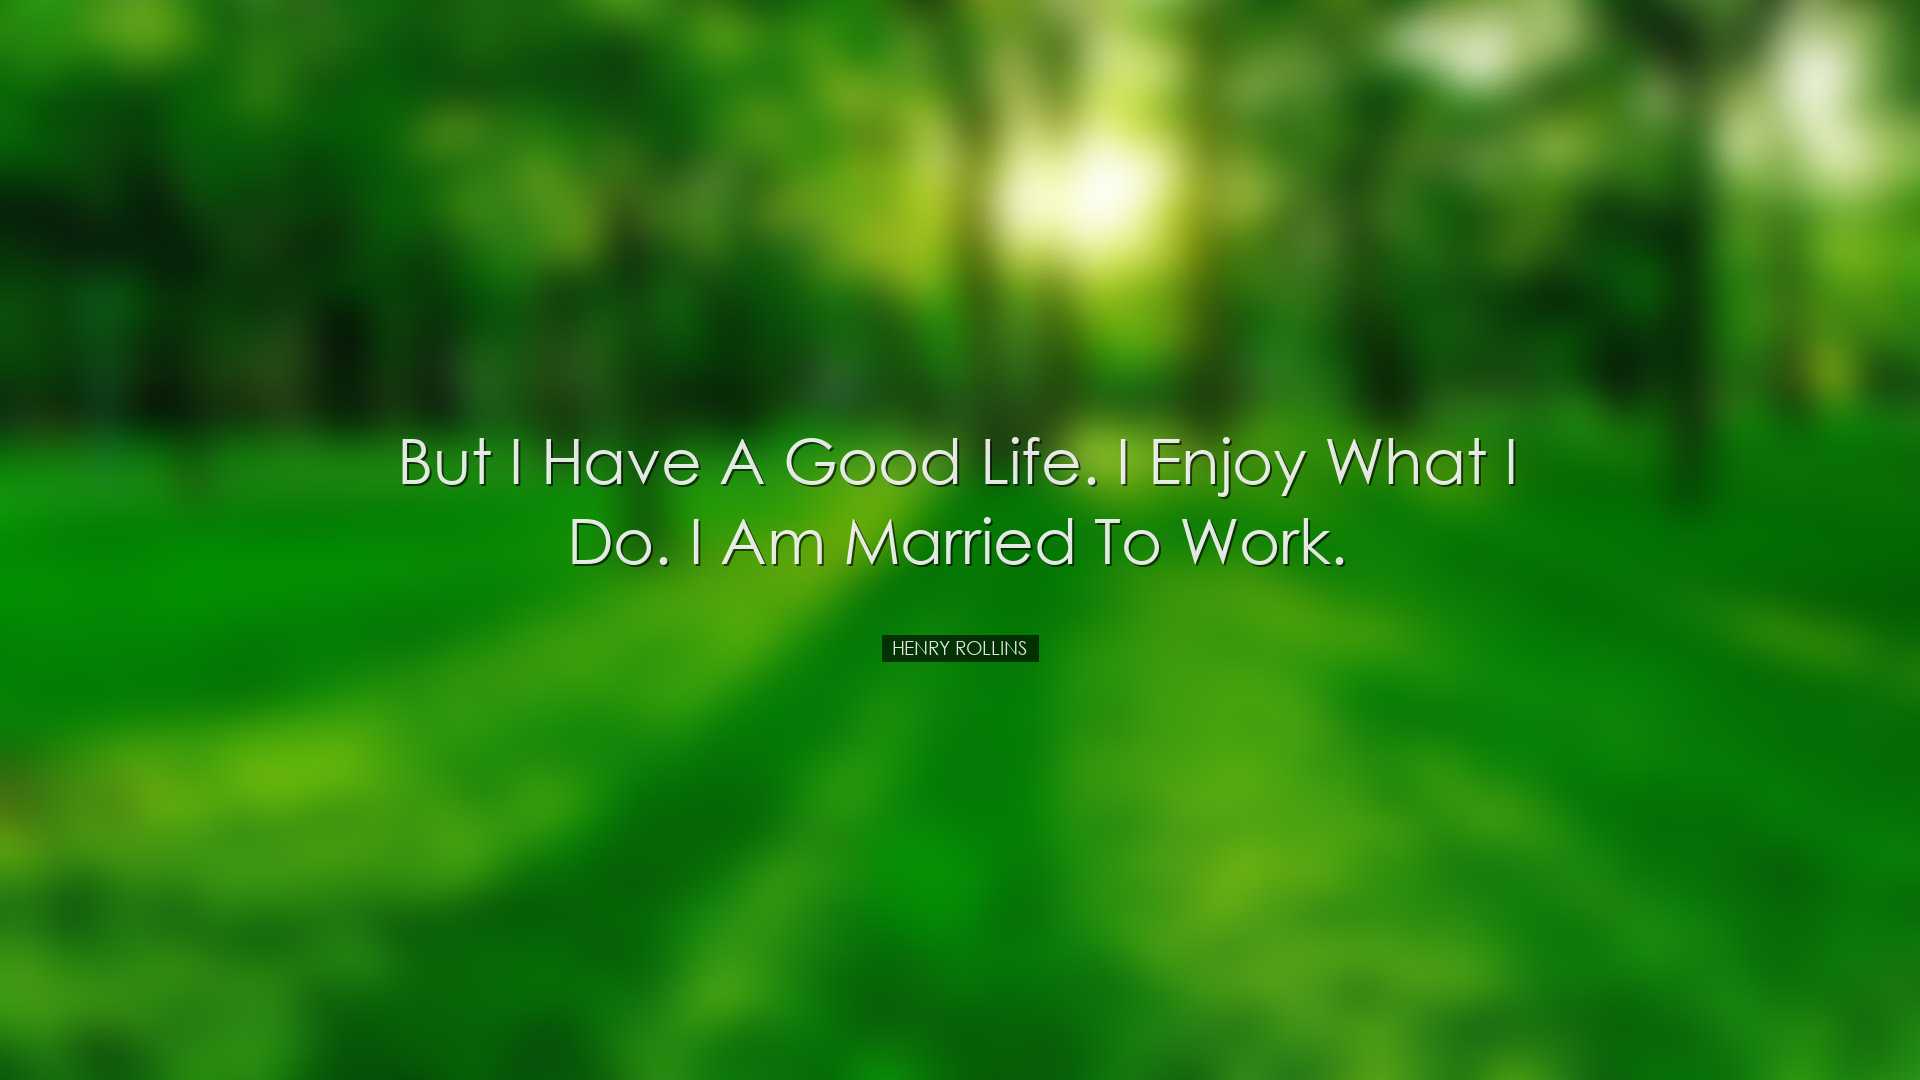 But I have a good life. I enjoy what I do. I am married to work. -